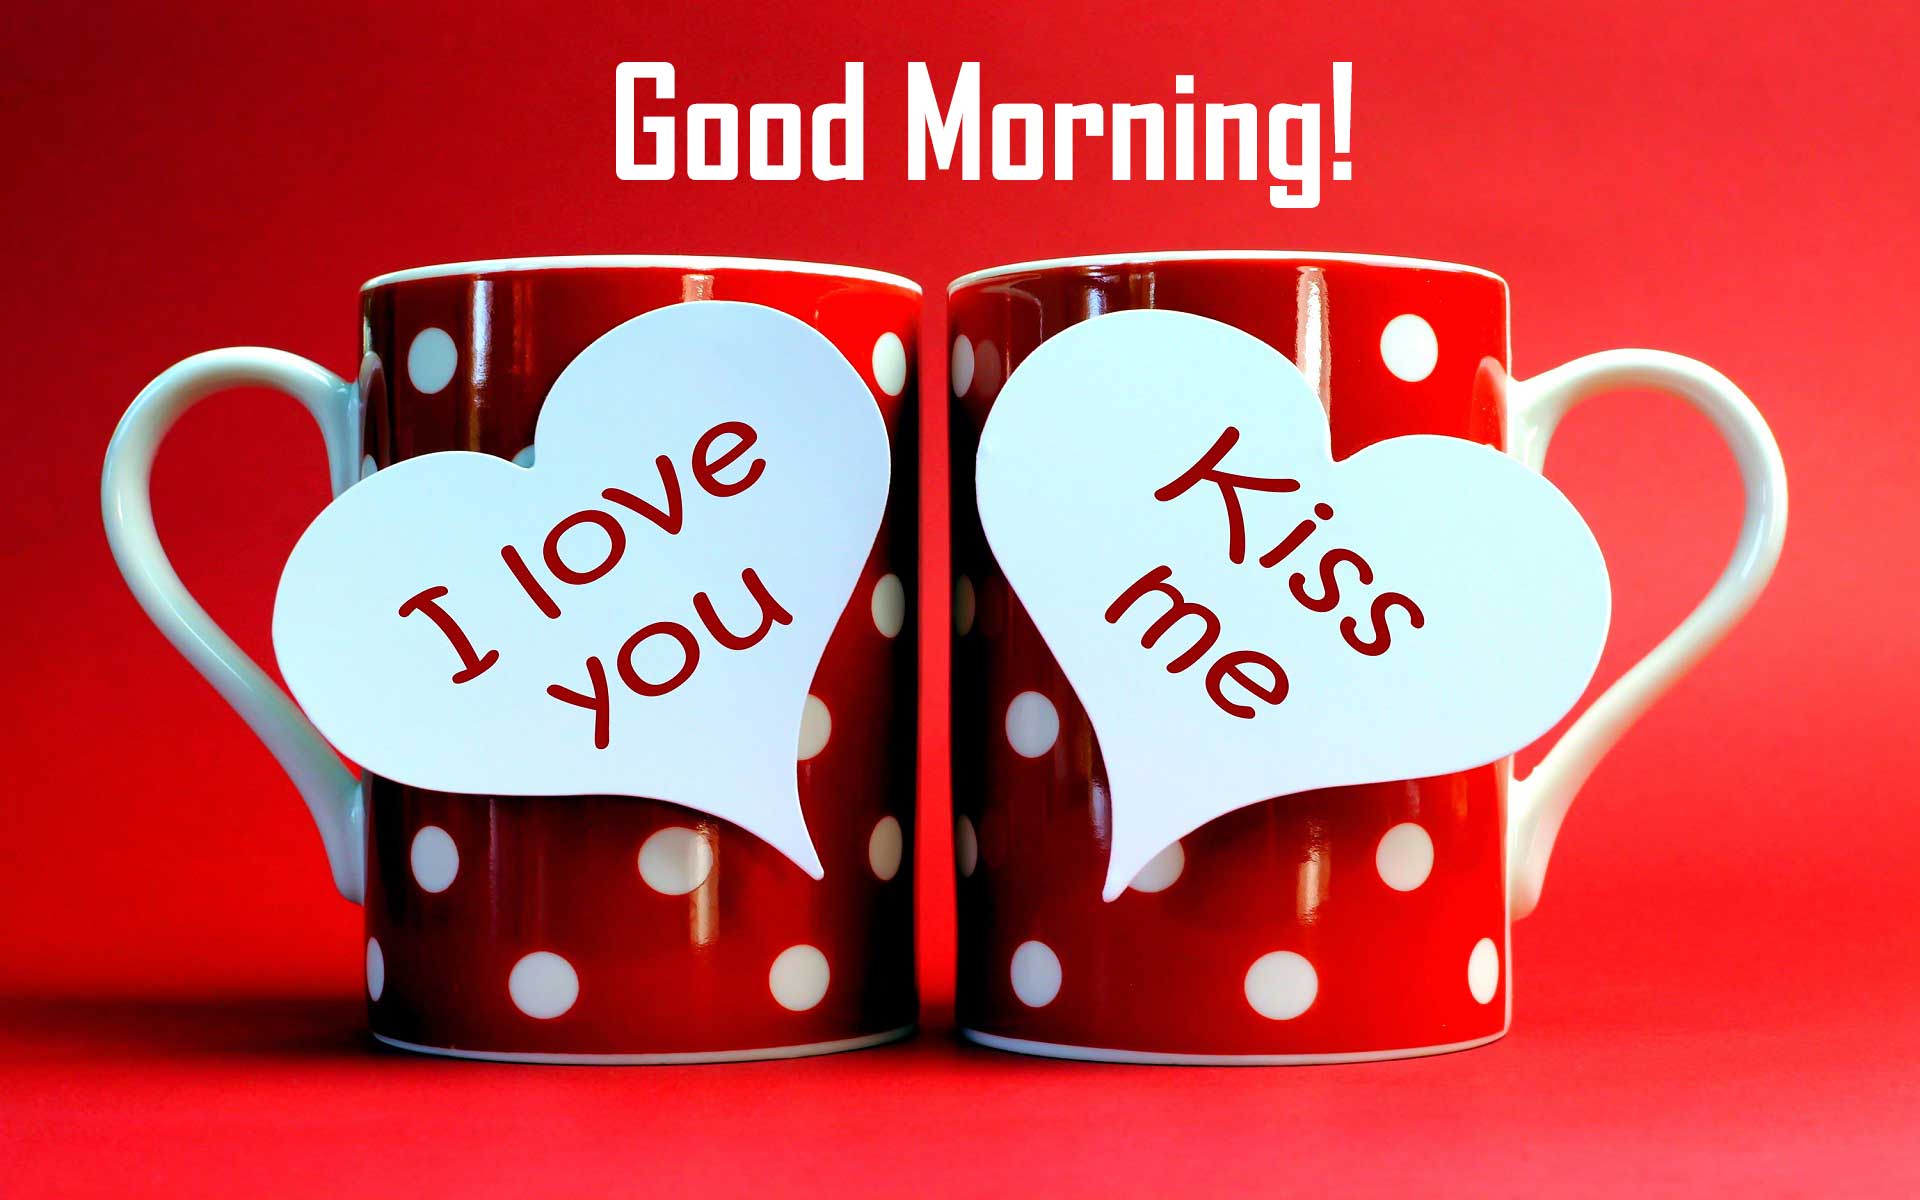 Good Morning Love Wallpapers